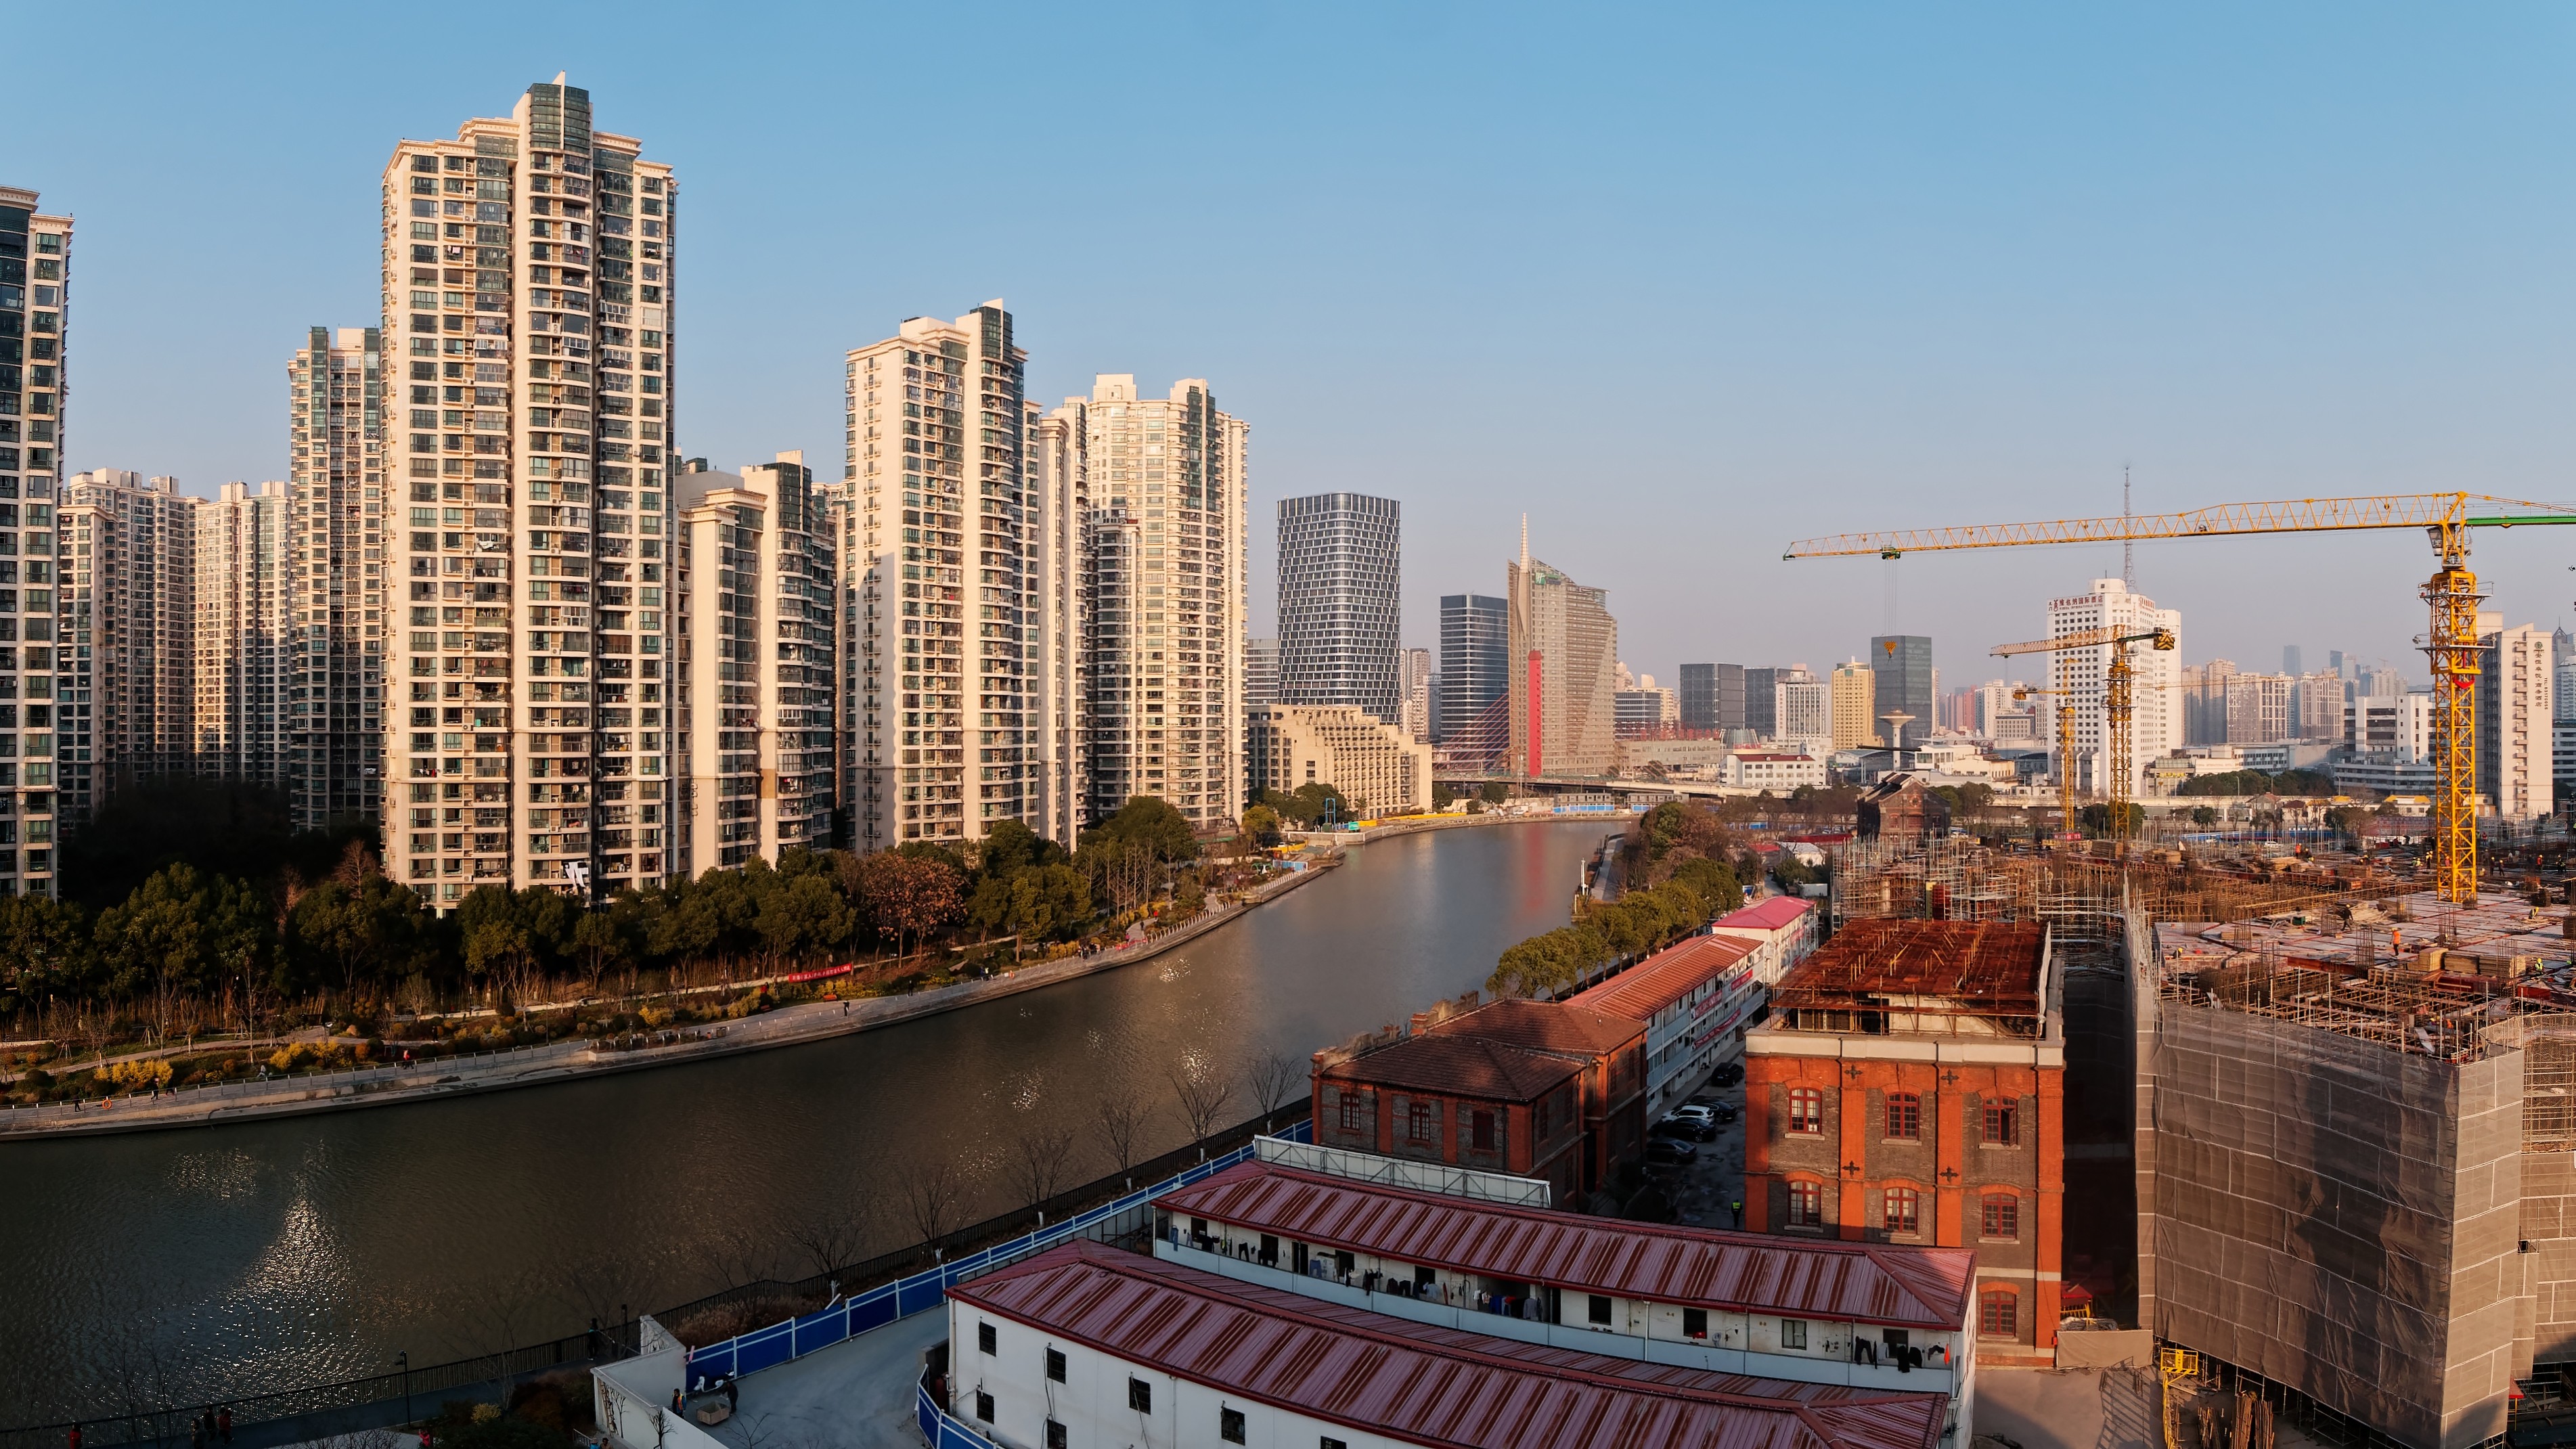 The Shanghai government is selling 19 plots in the city’s first land auction of the year. Photo: Shutterstock